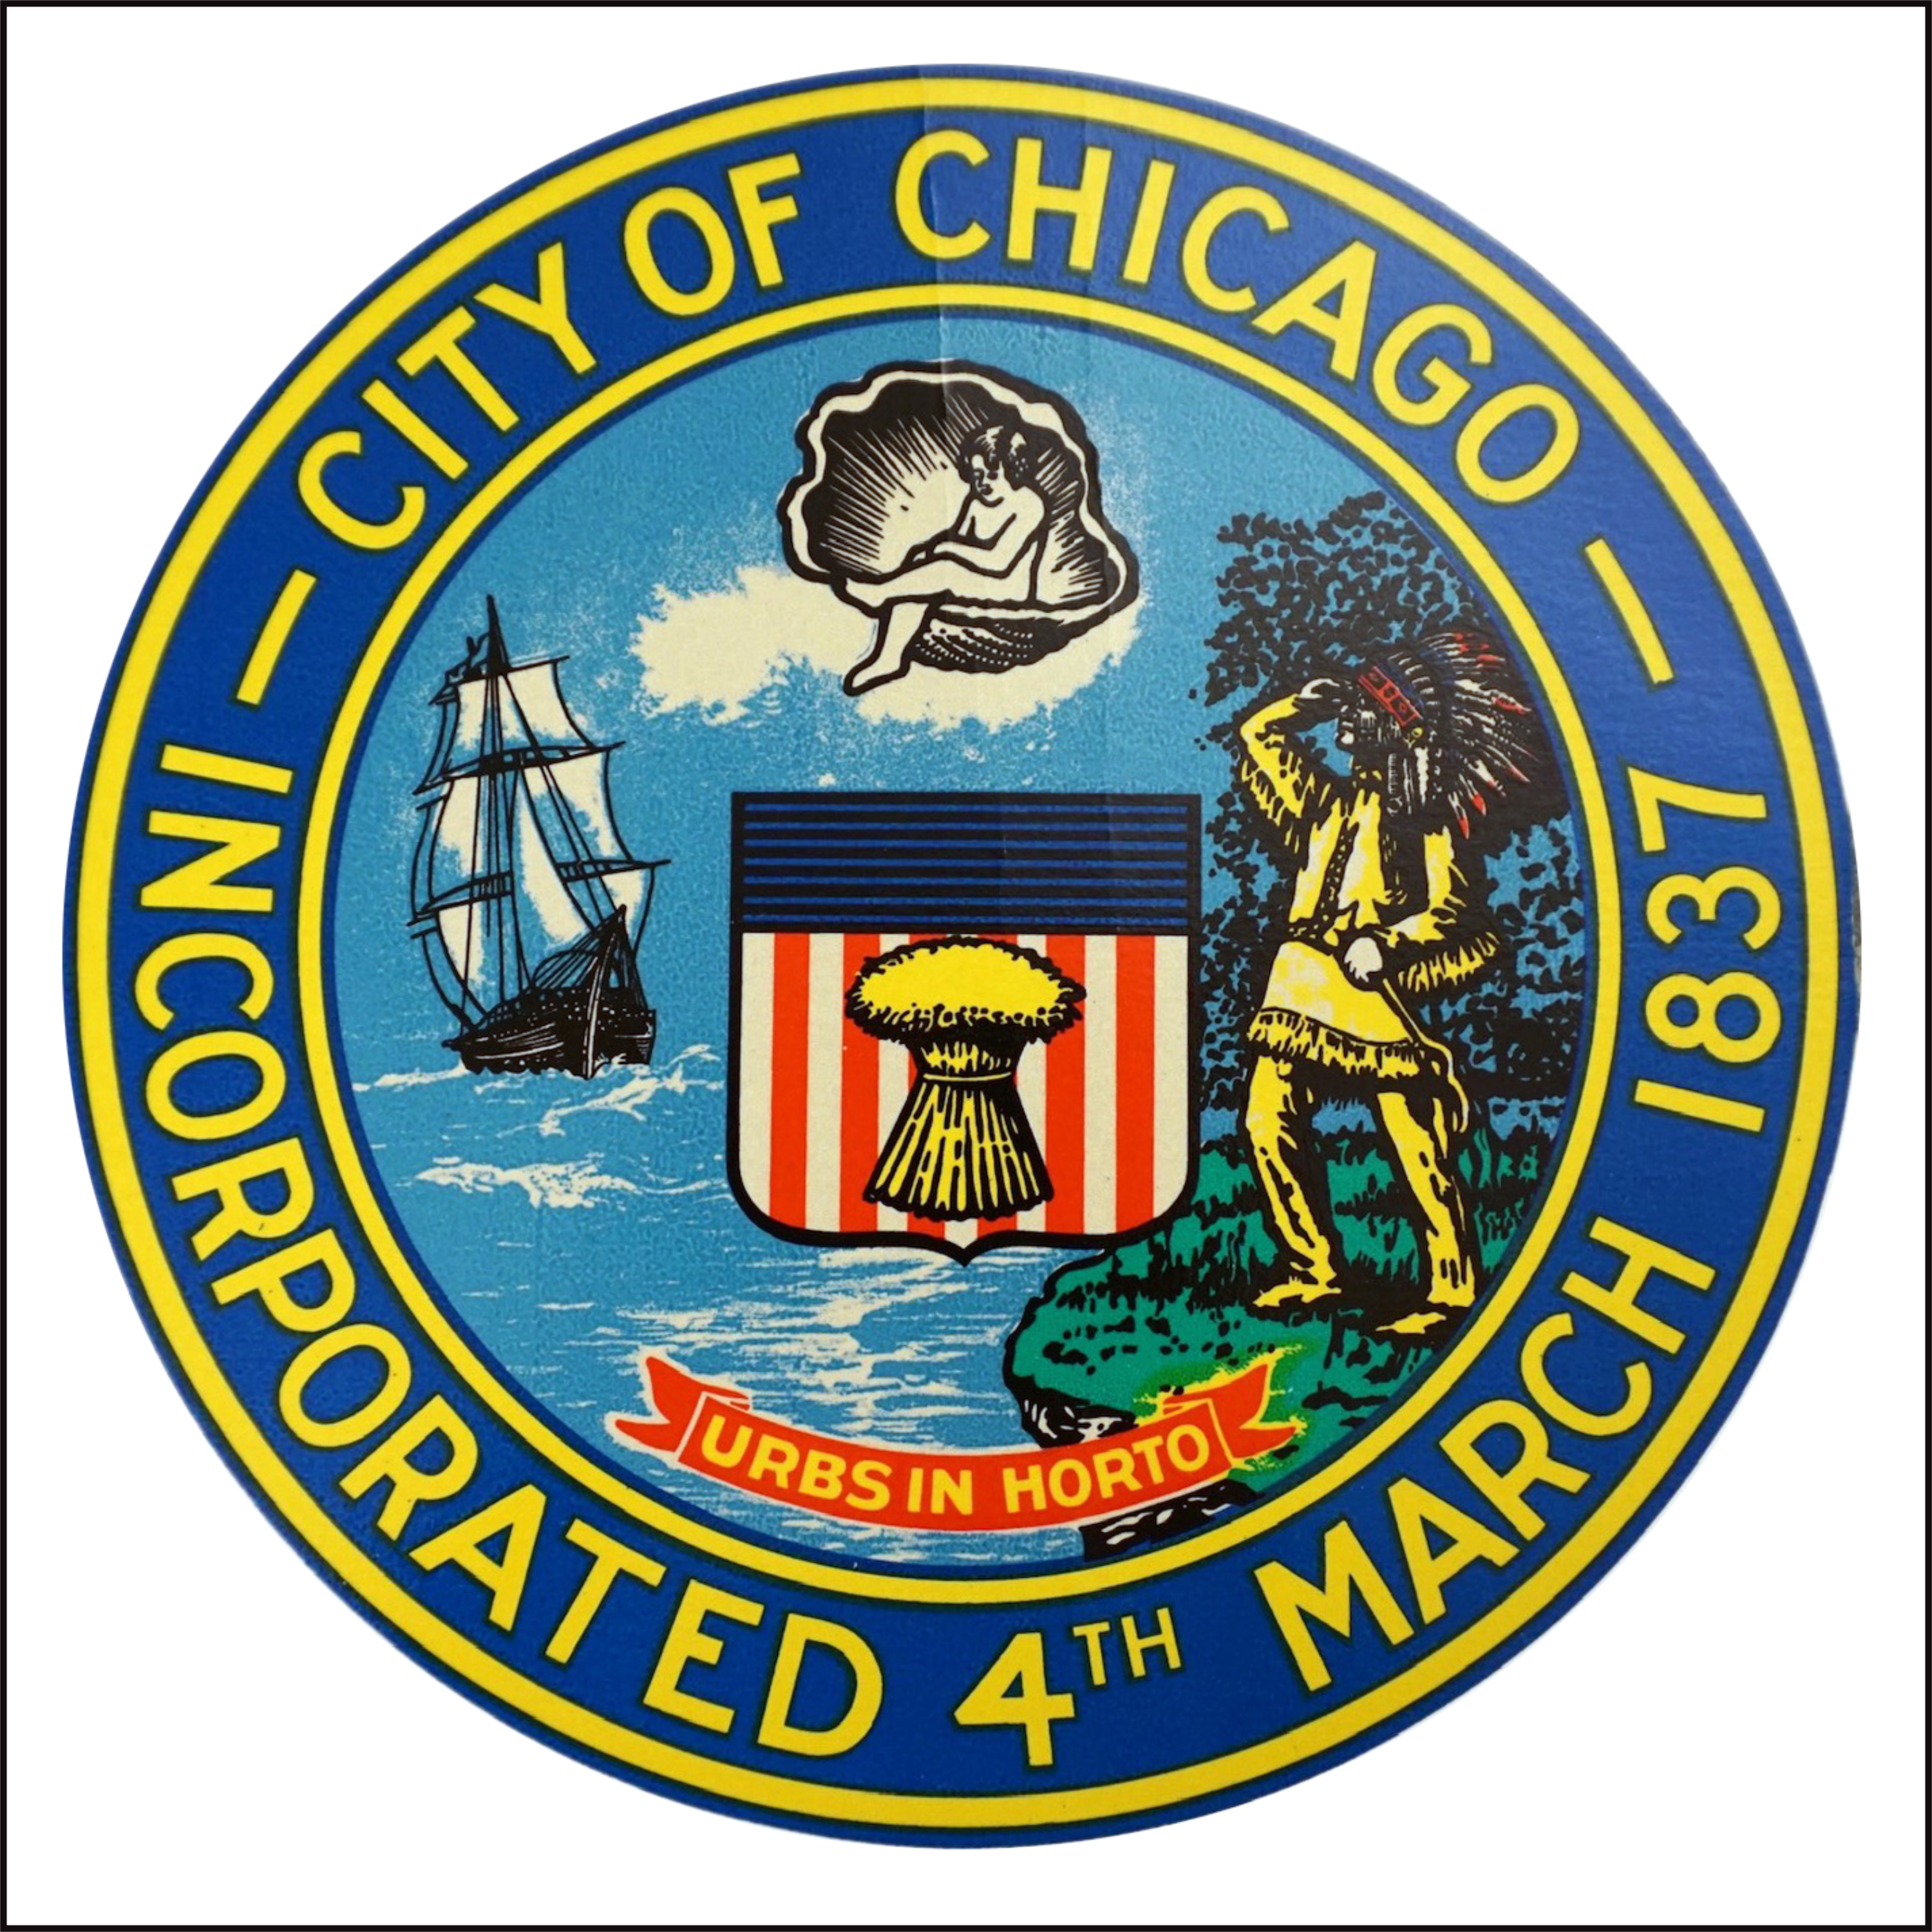 The 1975 seal, with its bright colors